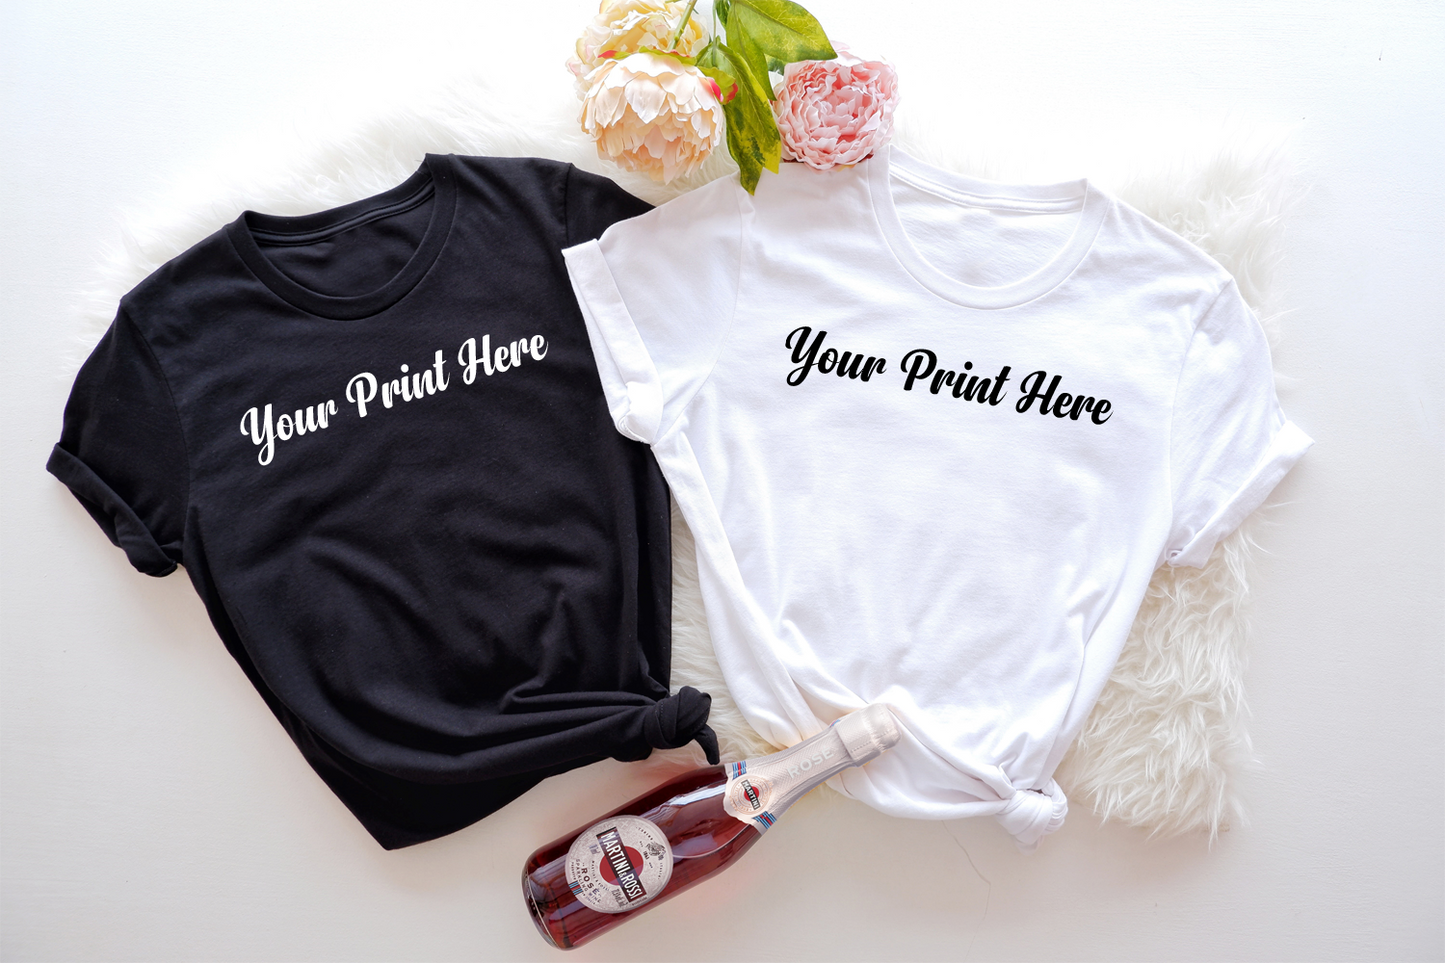 Make a statement with your custom-printed tee